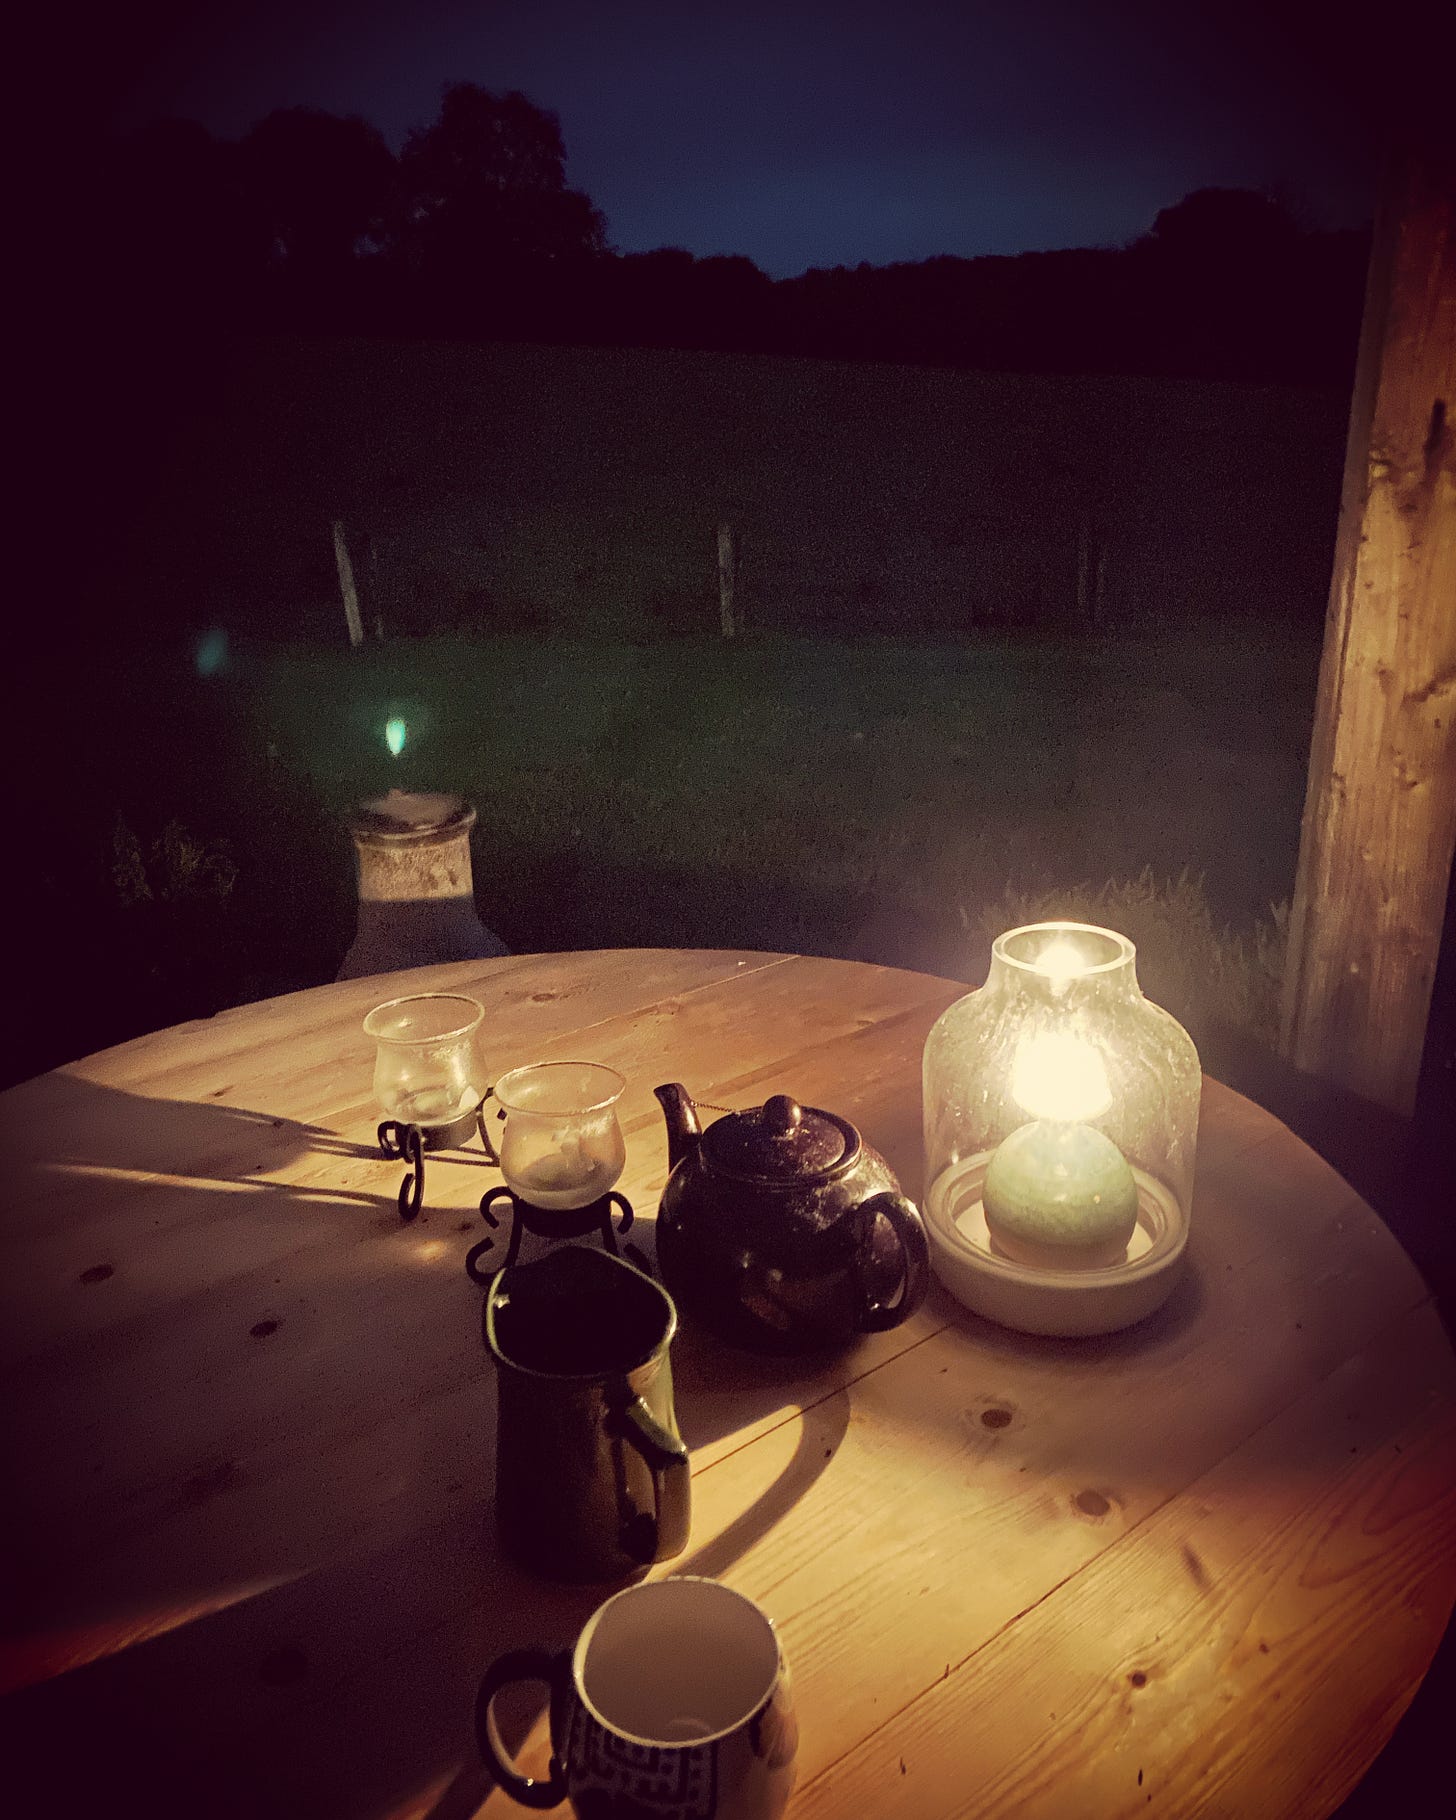 A small table holds a tea kettle and mug, and is lit by candlelight in the night.